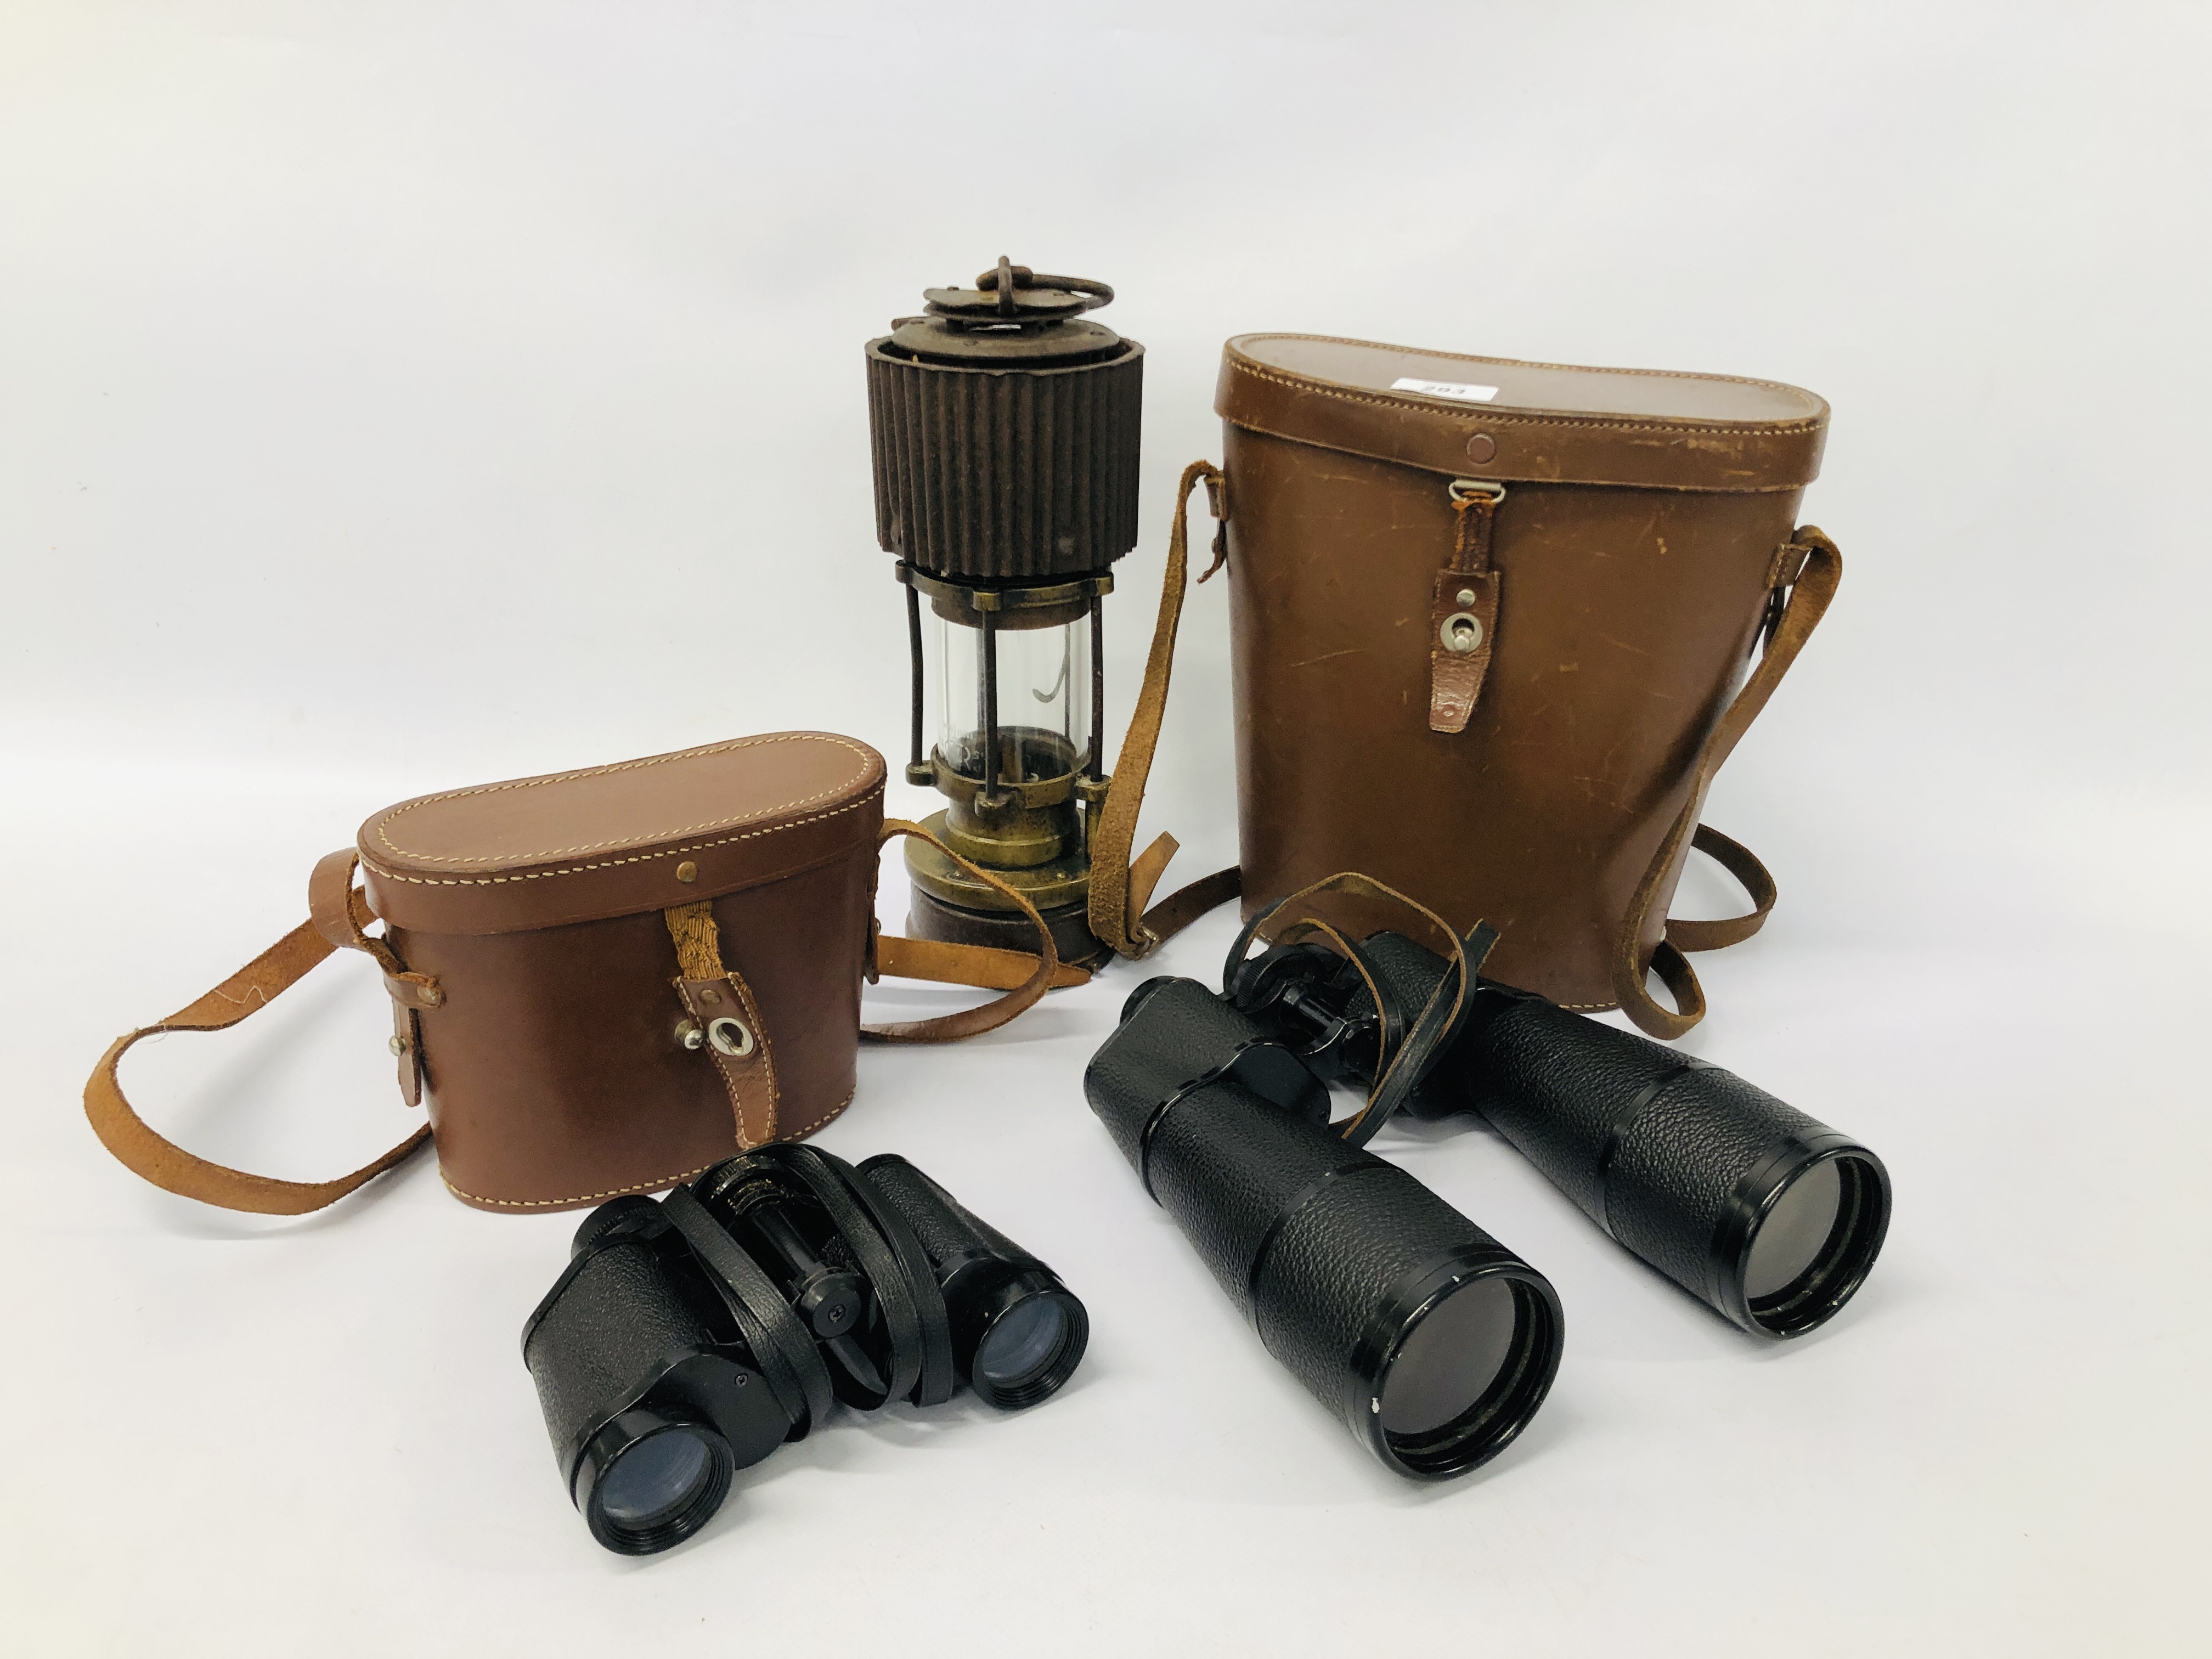 PAIR OF VINTAGE FIELD BINOCULARS IN FITTED BROWN LEATHER CASE MARKED "W.